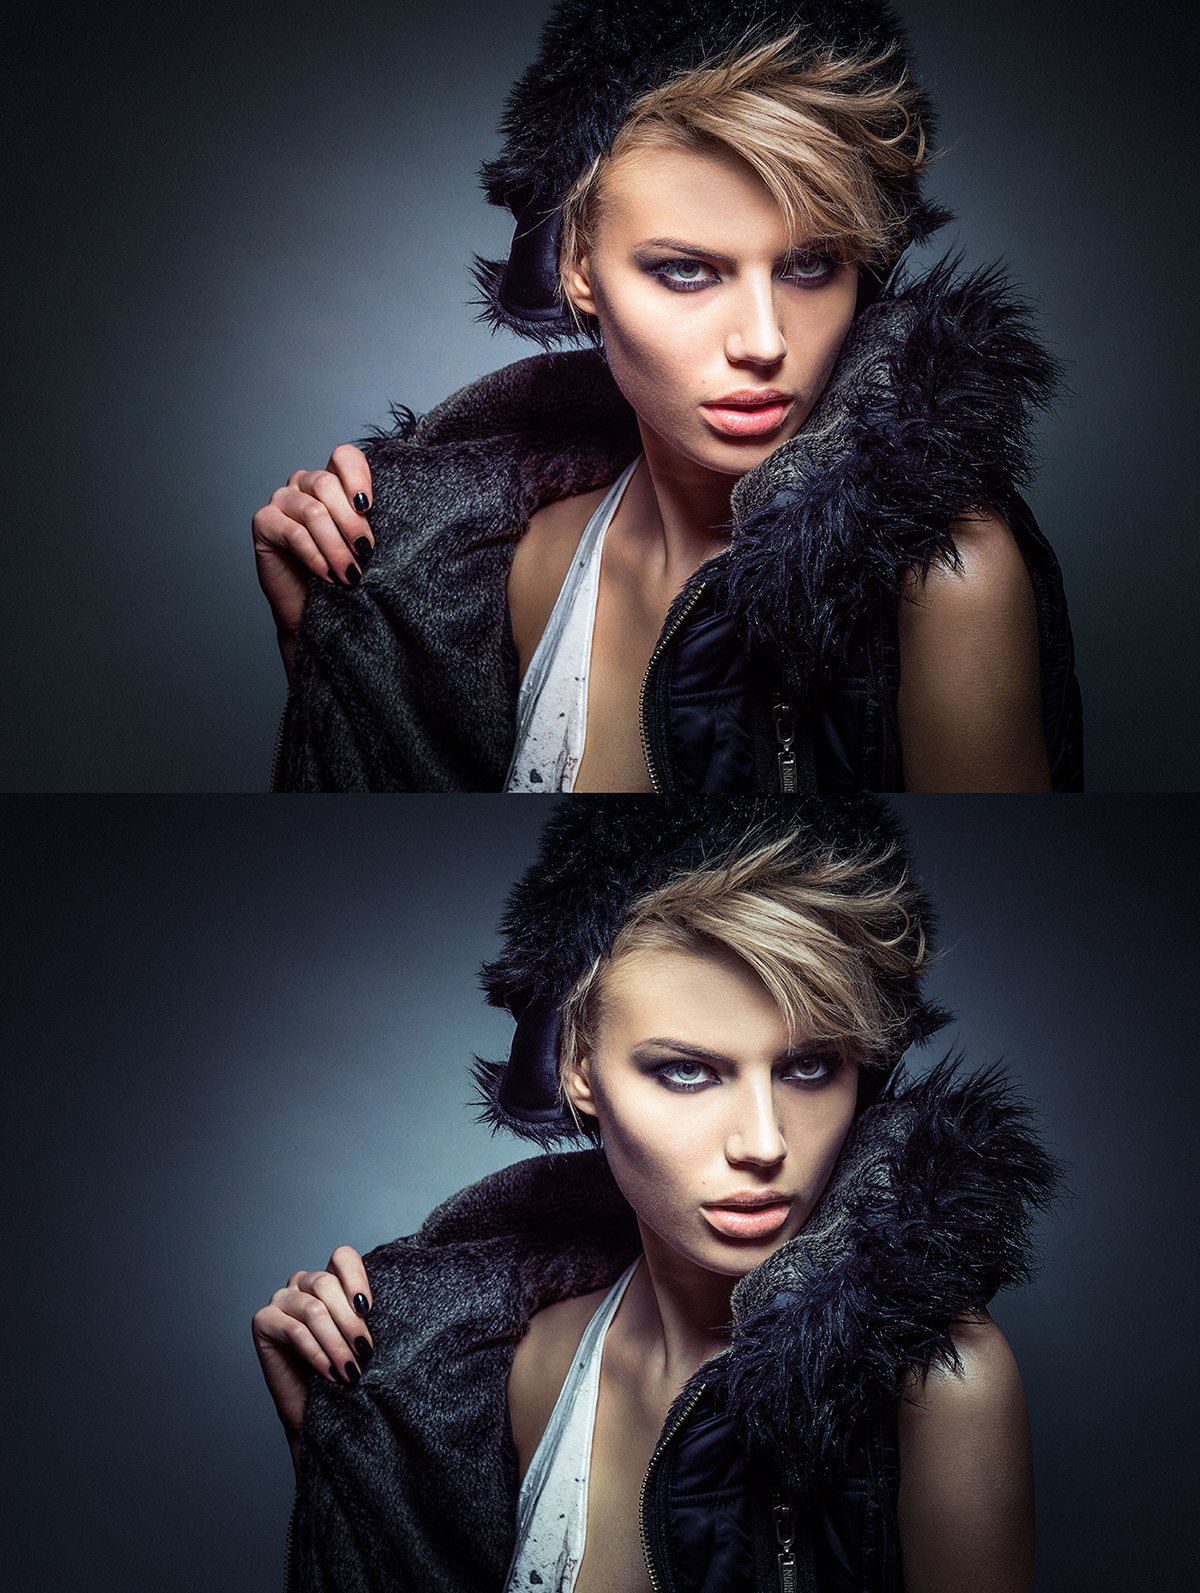 photo retouch edit before after photoshop